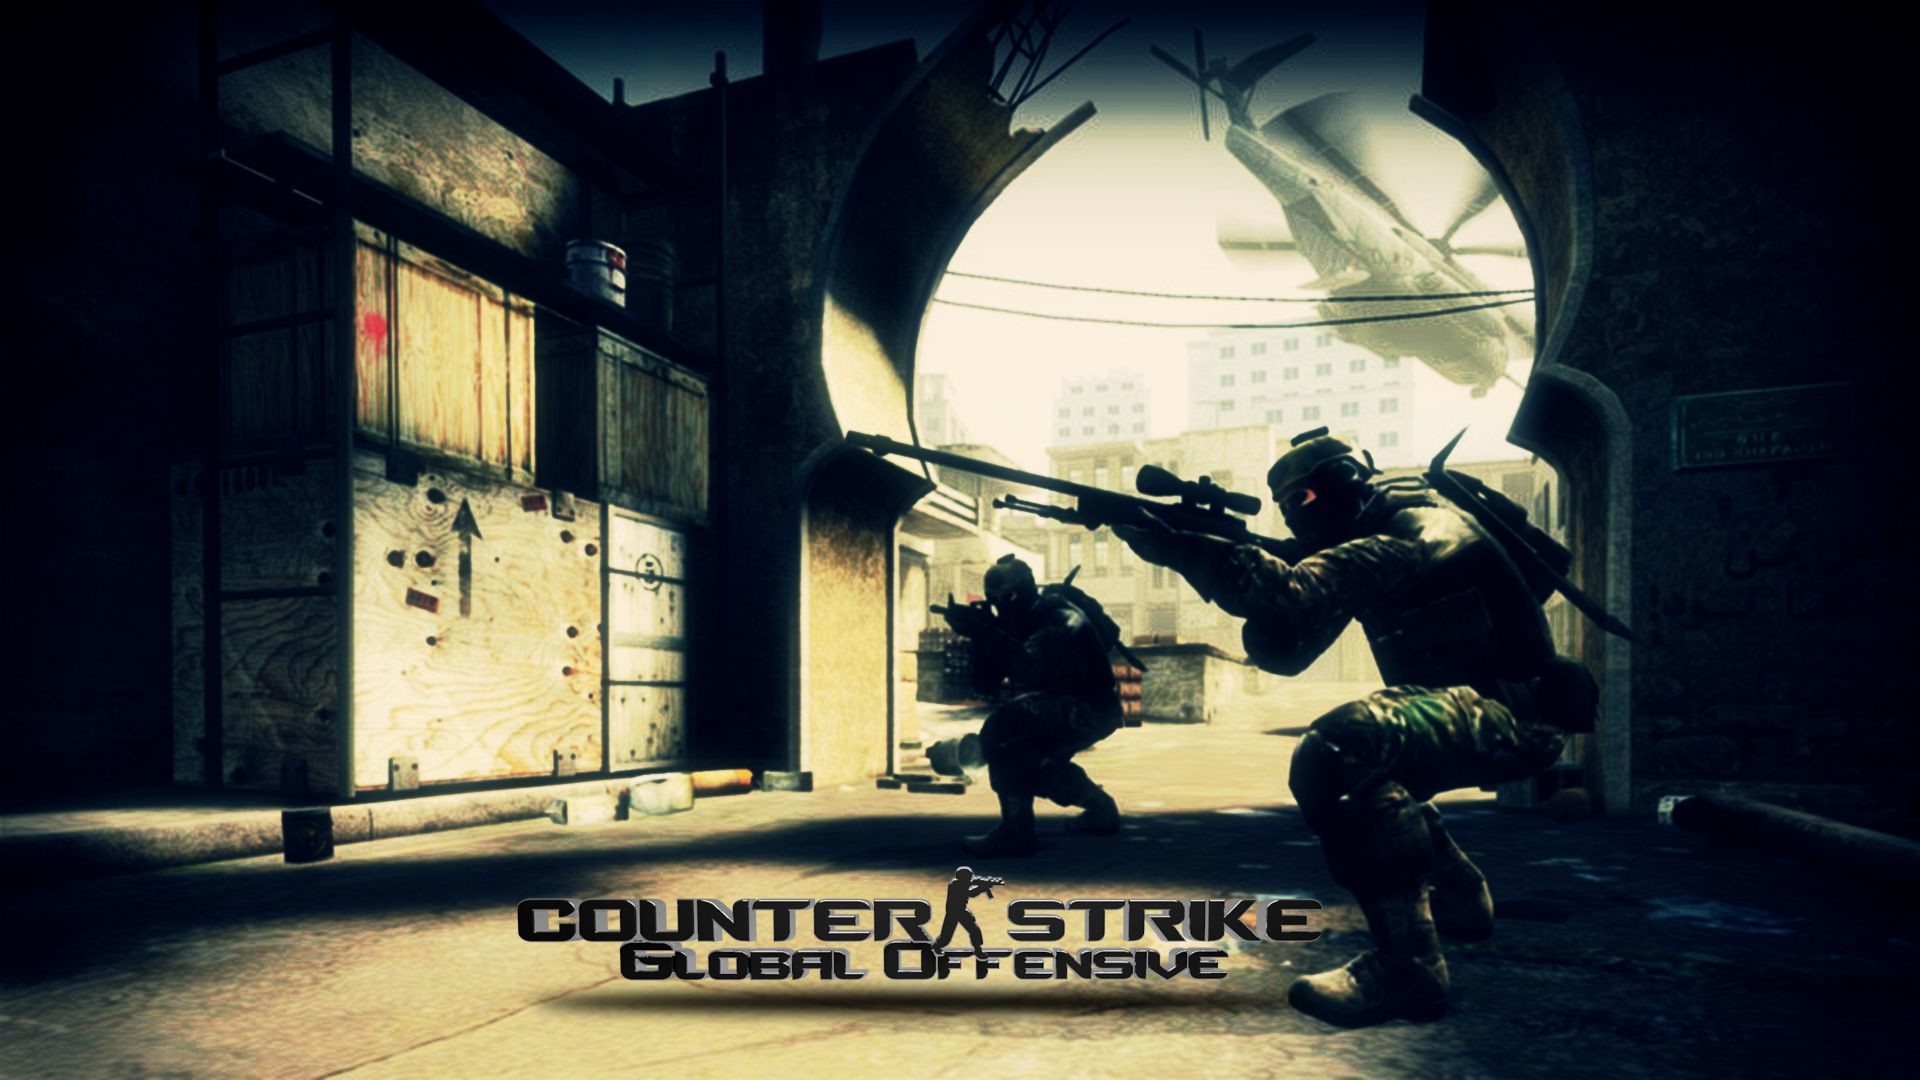 1920x1080 Counter_Strike_Global_Offensive.  counter_strike_global_offensive_1024x768_wallpaper.  Counter_Strike_Global_Offensive_CS_GO_HD_Wallpaper